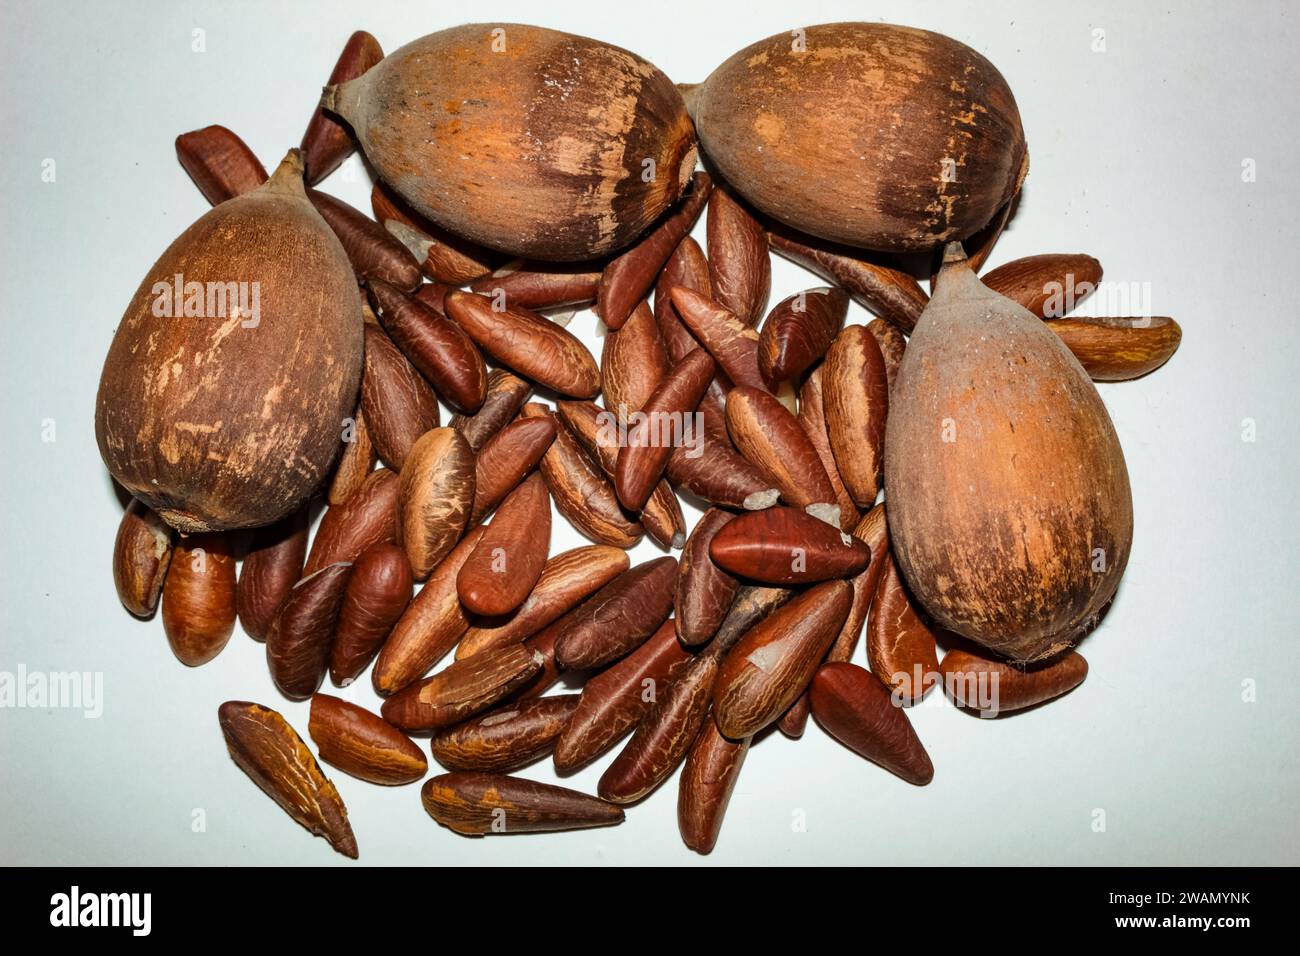 Shelled coconuts and almonds, from the babassu palm, Attalea speciosa. Stock Photo